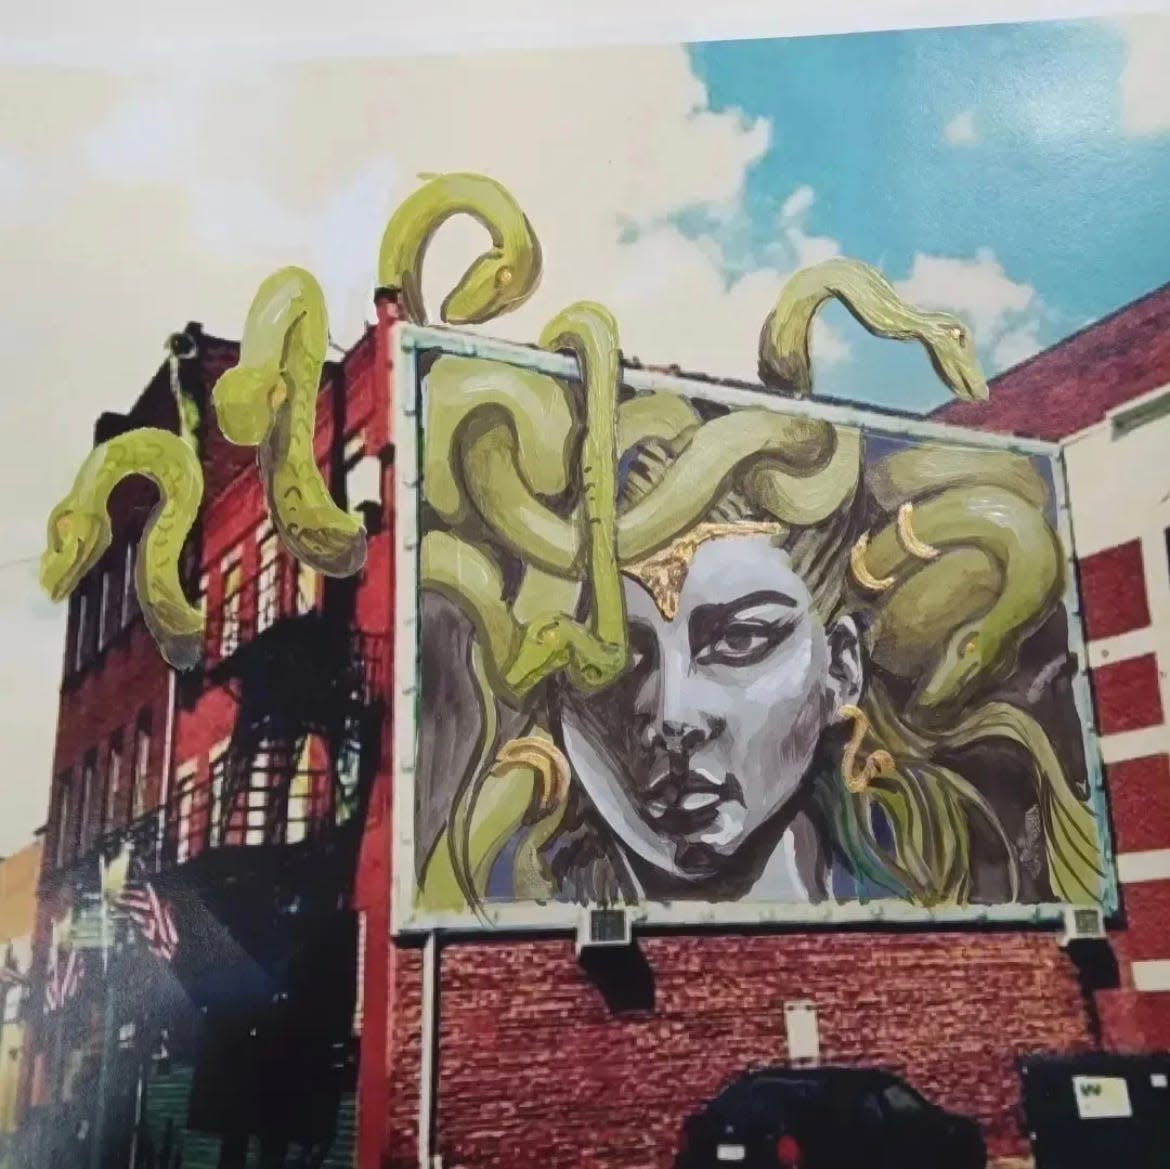 When artist Thomas Morgan recreates his "Polypus" mural on Fourth Street NW in Canton, he imagines turning the tentacles into the snakes of "Medusa." He has created a GoFundMe page with a goal of raising $10,000 to help fund the restoration project.